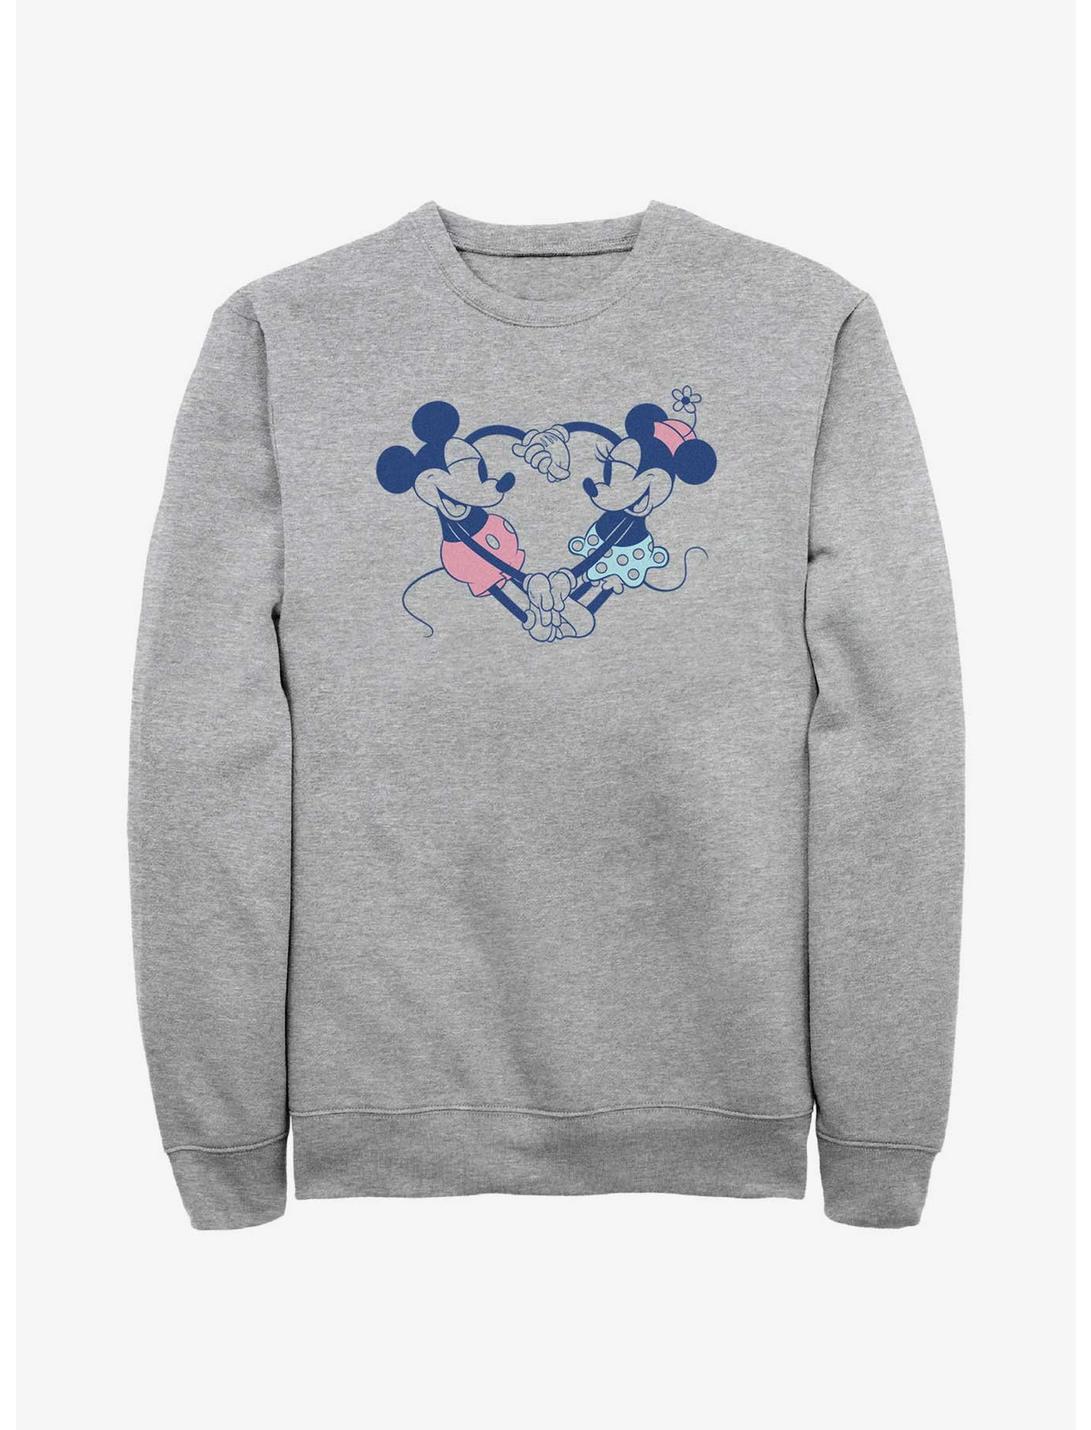 Disney Mickey Mouse & Minnie Mouse Heart Pair Sweatshirt, ATH HTR, hi-res